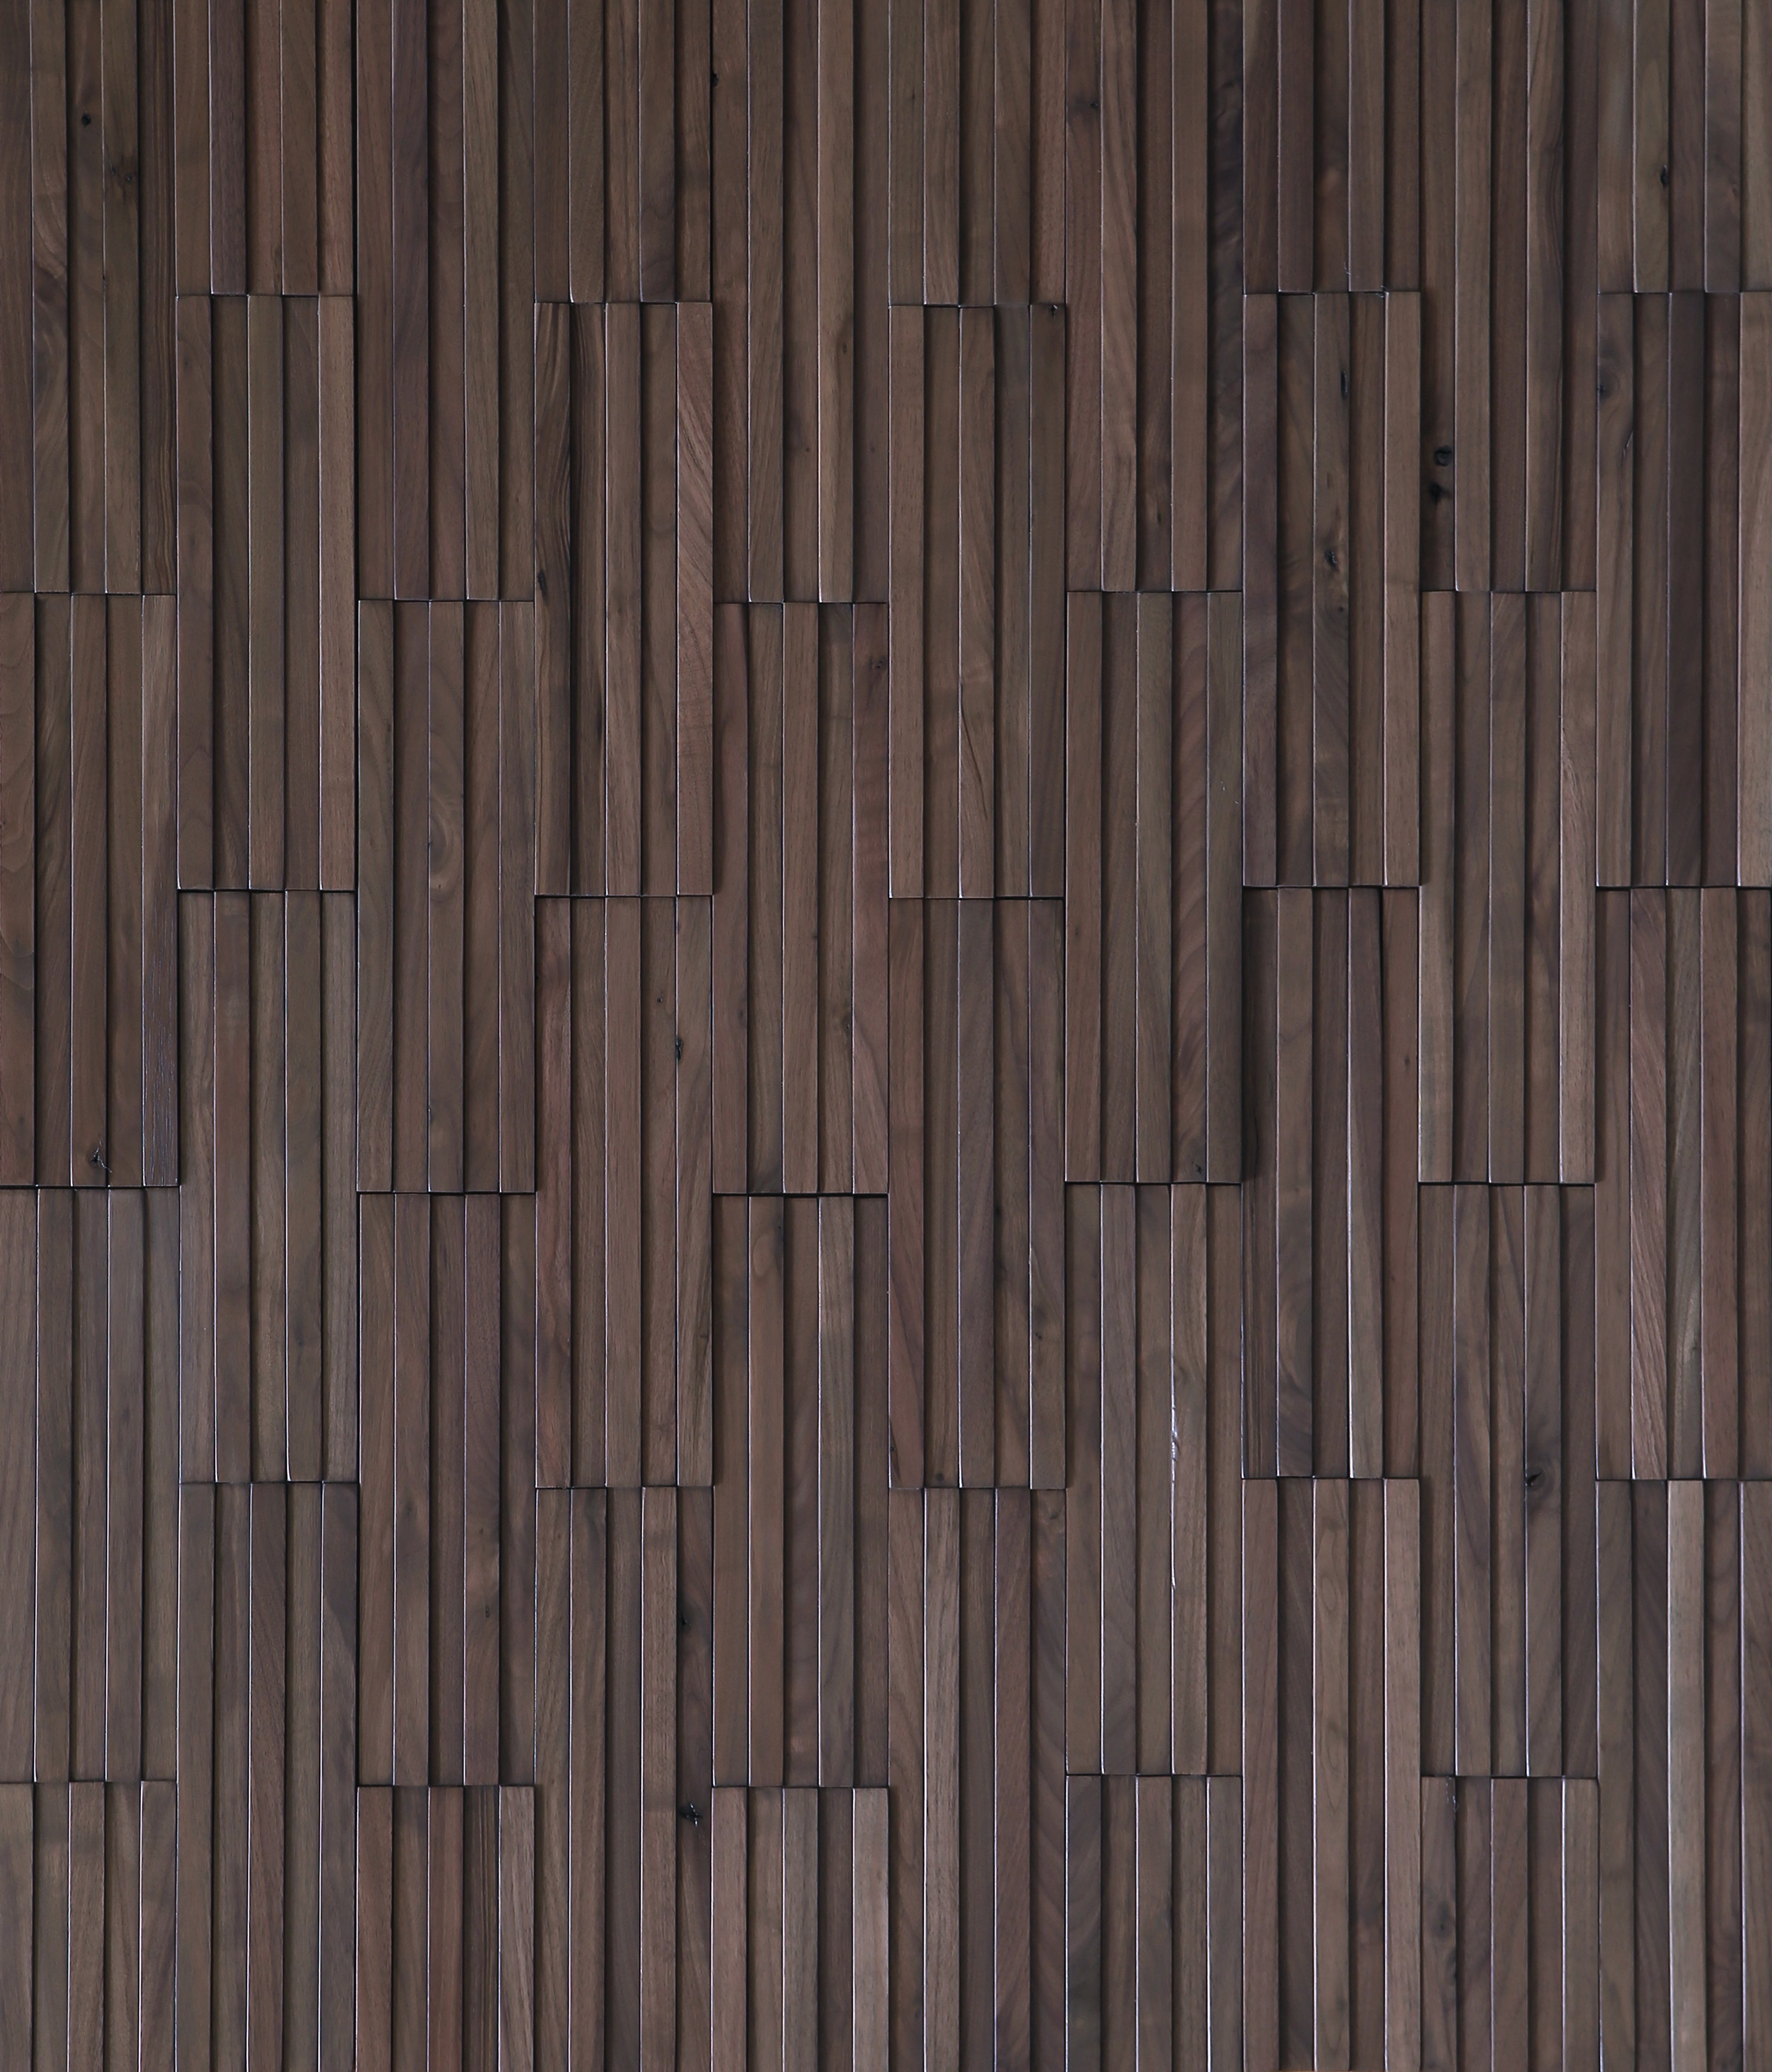 duchateau inceptiv parallels brown ash walnut three dimensional wall natural wood panel conversion varnish for interior use distributed by surface group international